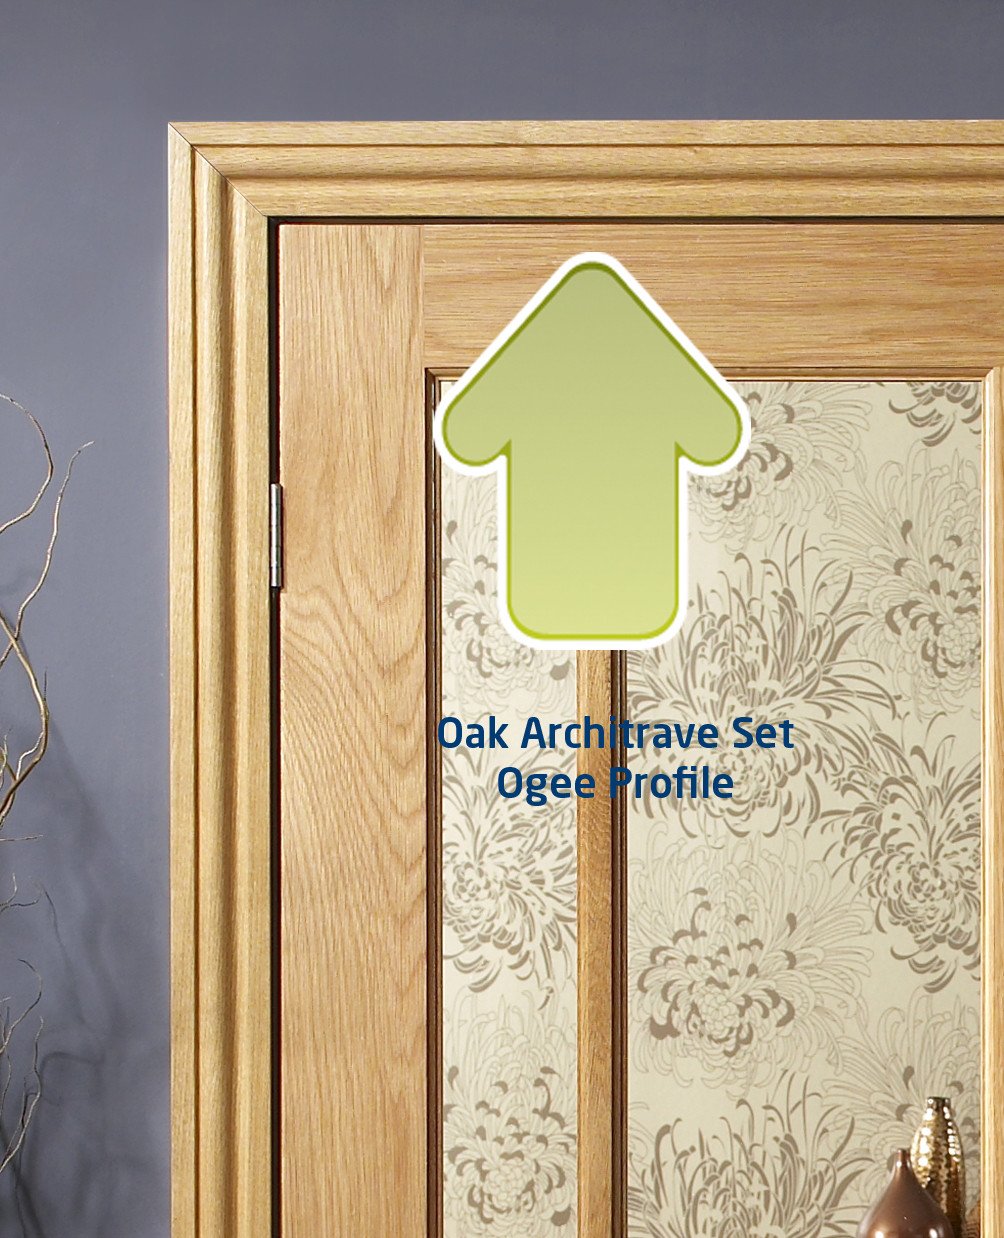 XL Joinery Internal Oak Door Pair Architrave Set In a Classic 'Ogee' Profile Pack